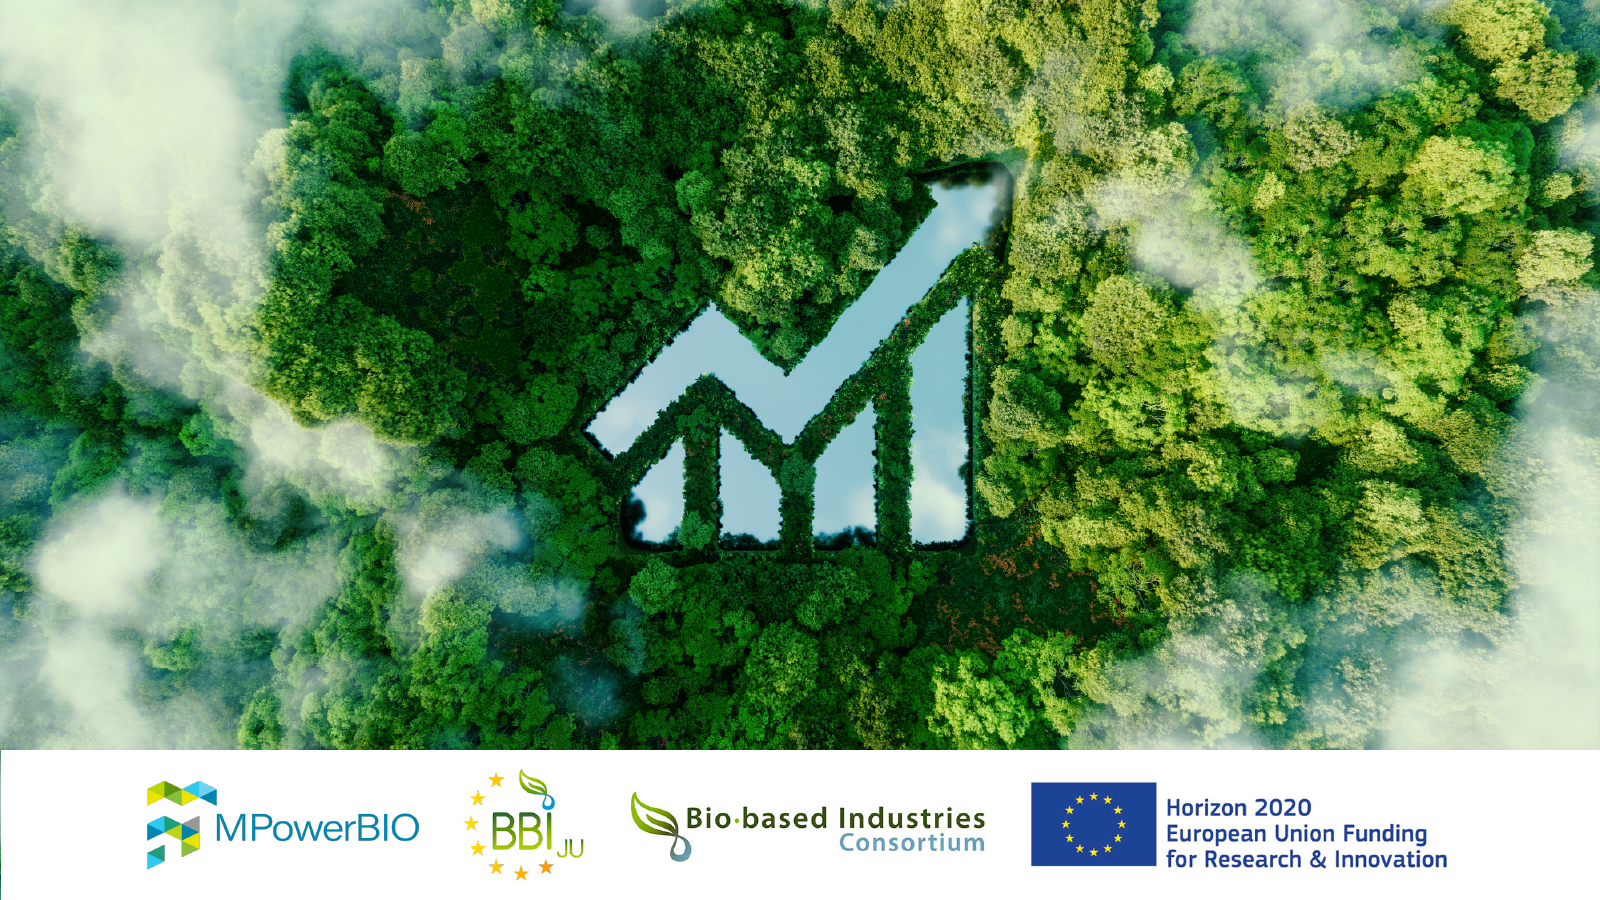 Rolling out MPowerBIO’s Cluster Capacity Building Programme – 2022 Edition